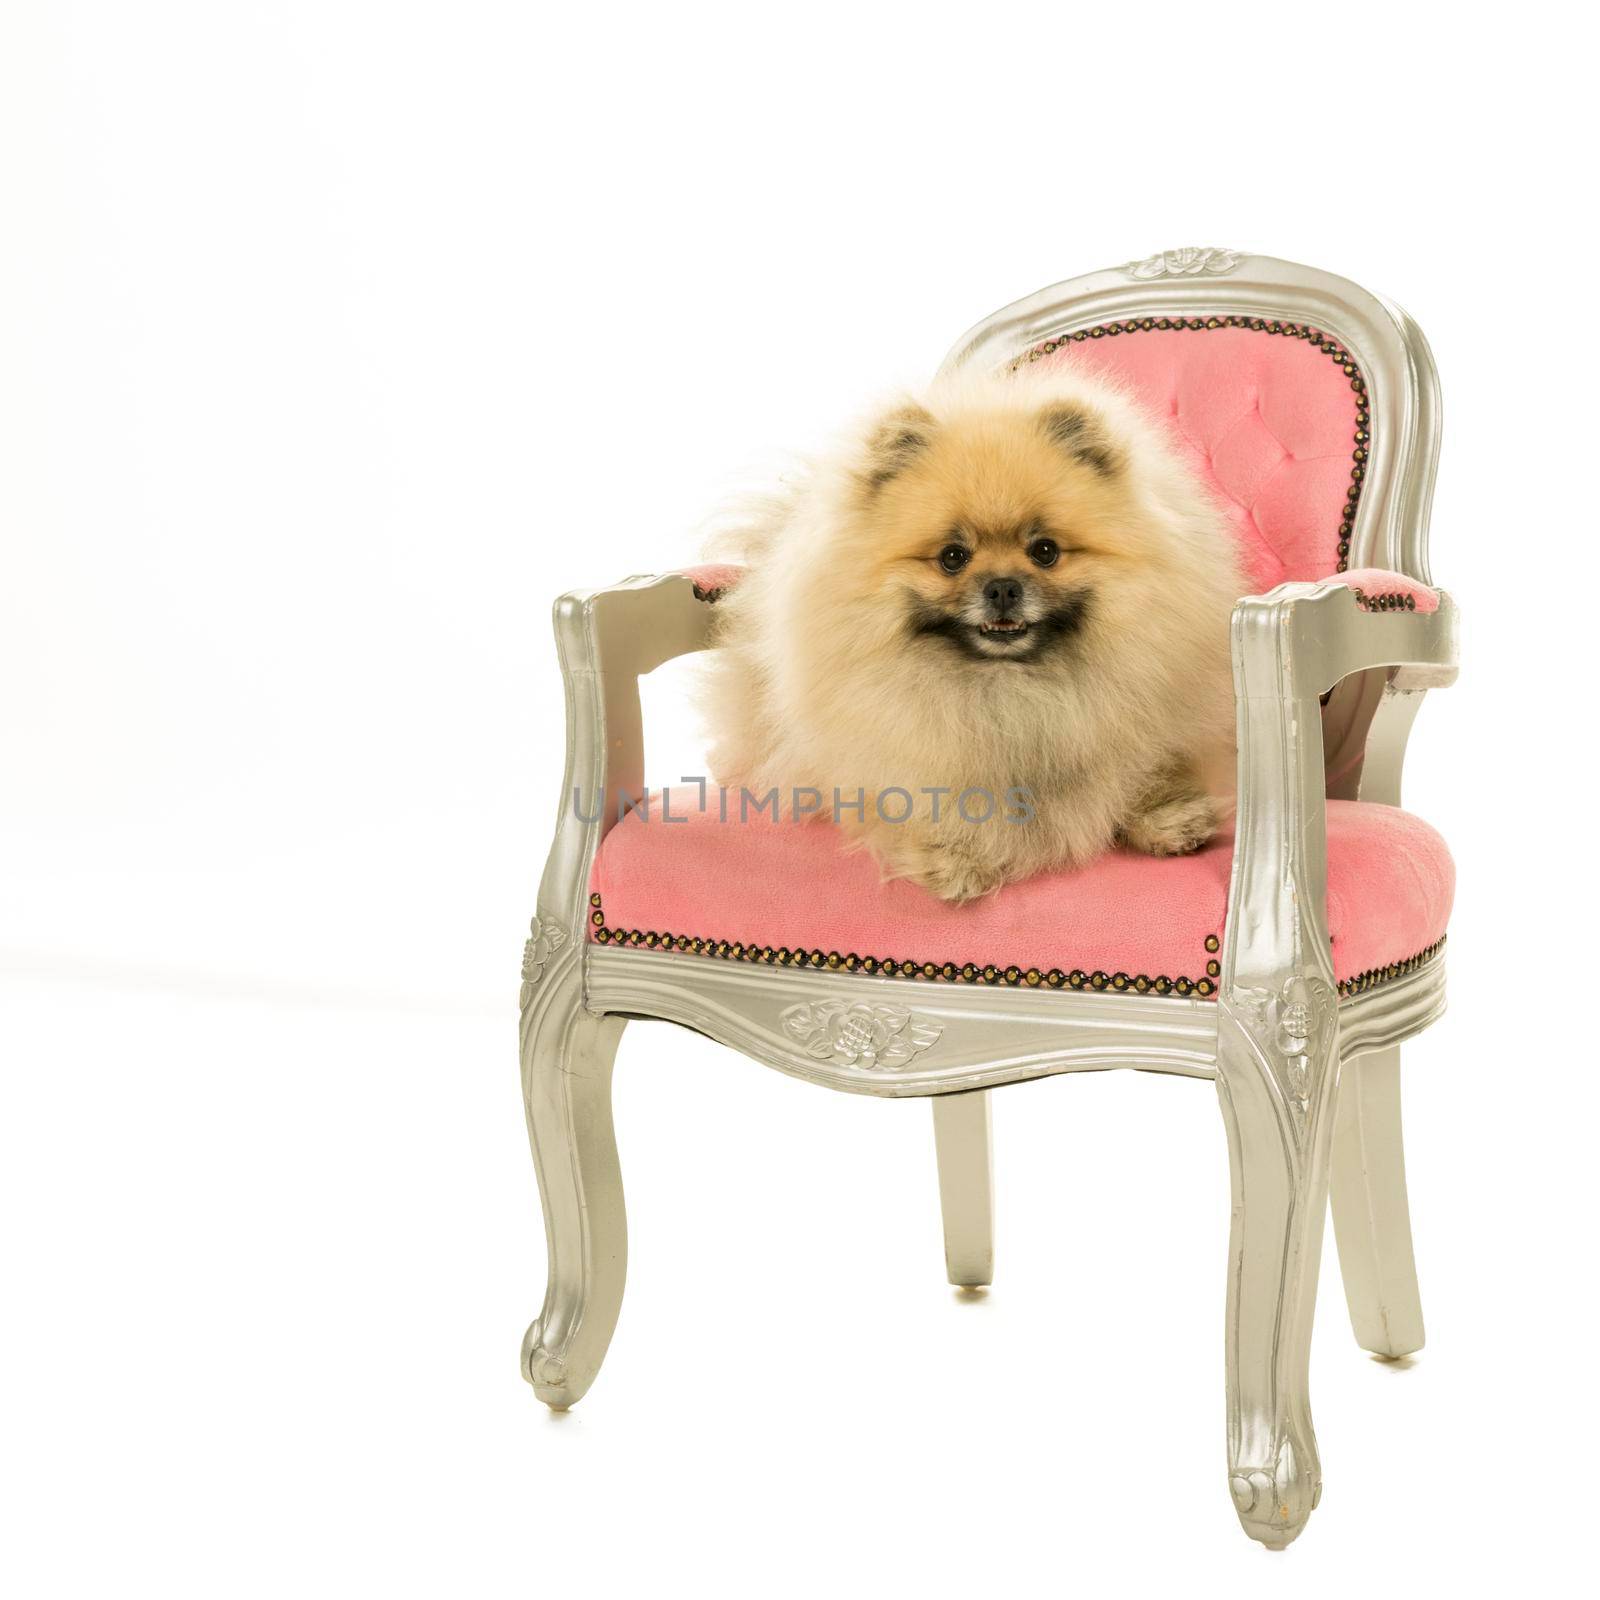 Cute cream and brown Pomeranian - Dwarf Spitz dog sitting in a pink baroque chair isolated on white background